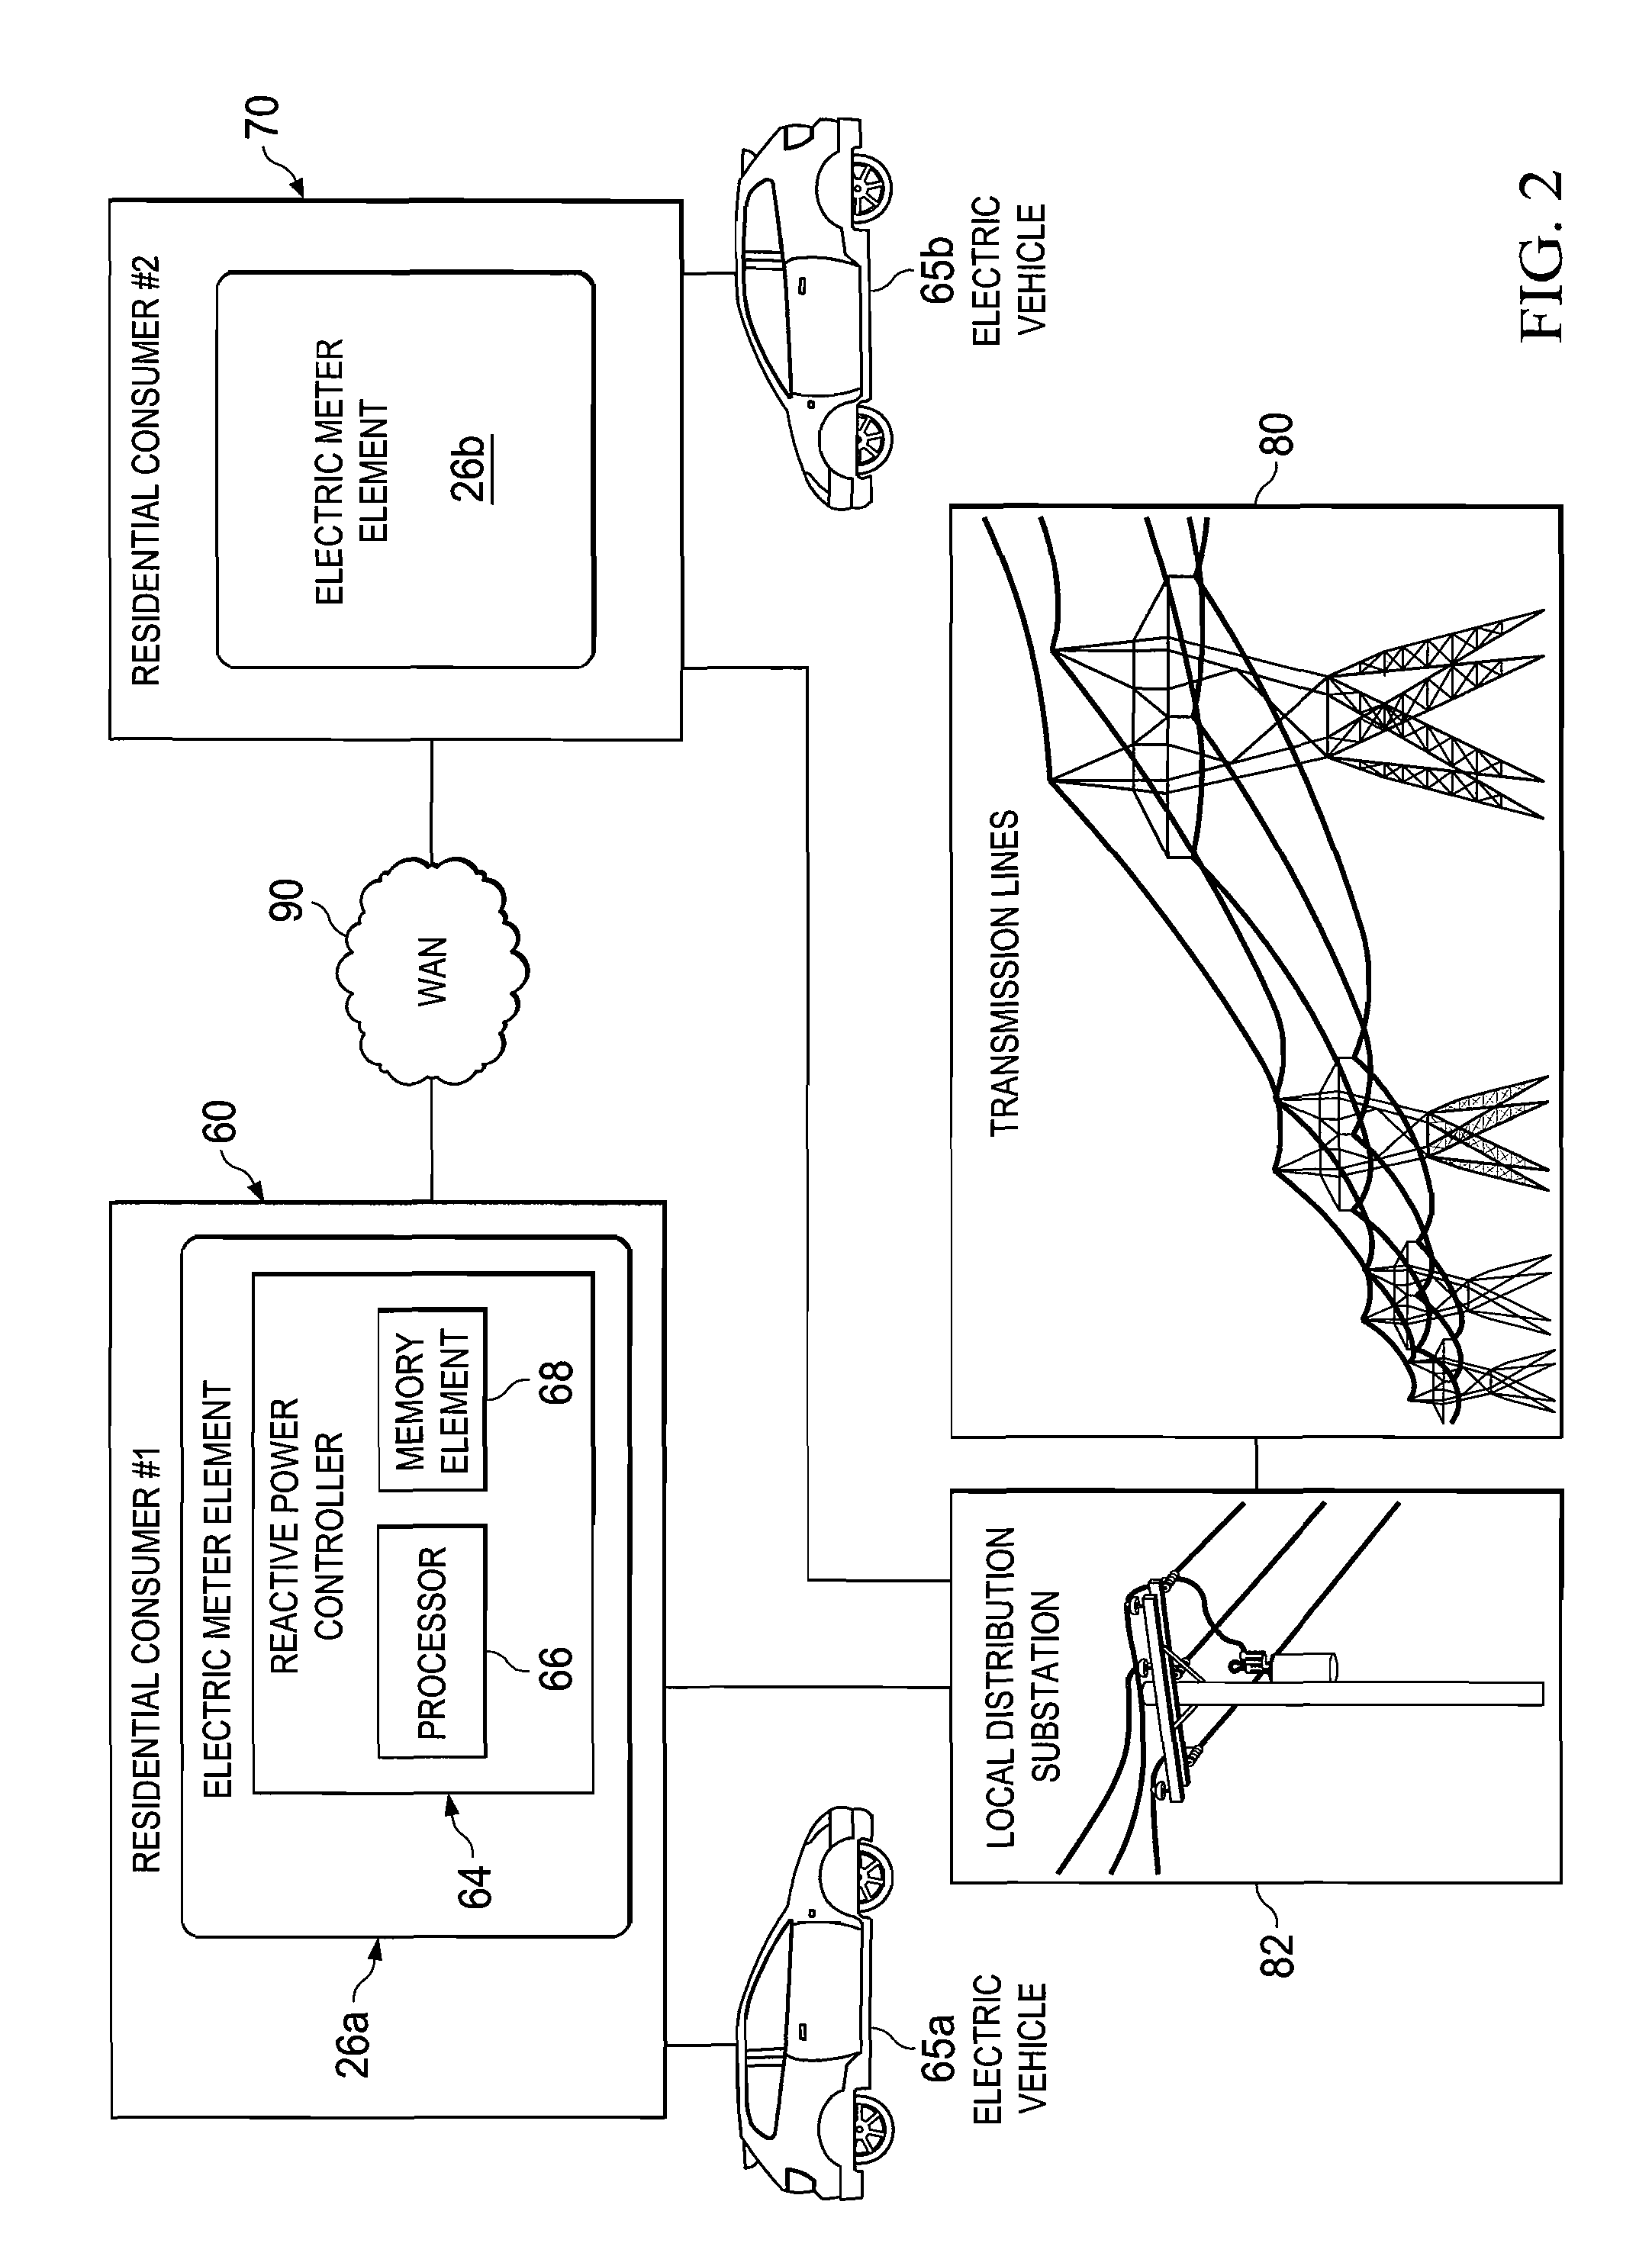 System and method for providing collaborating power controllers